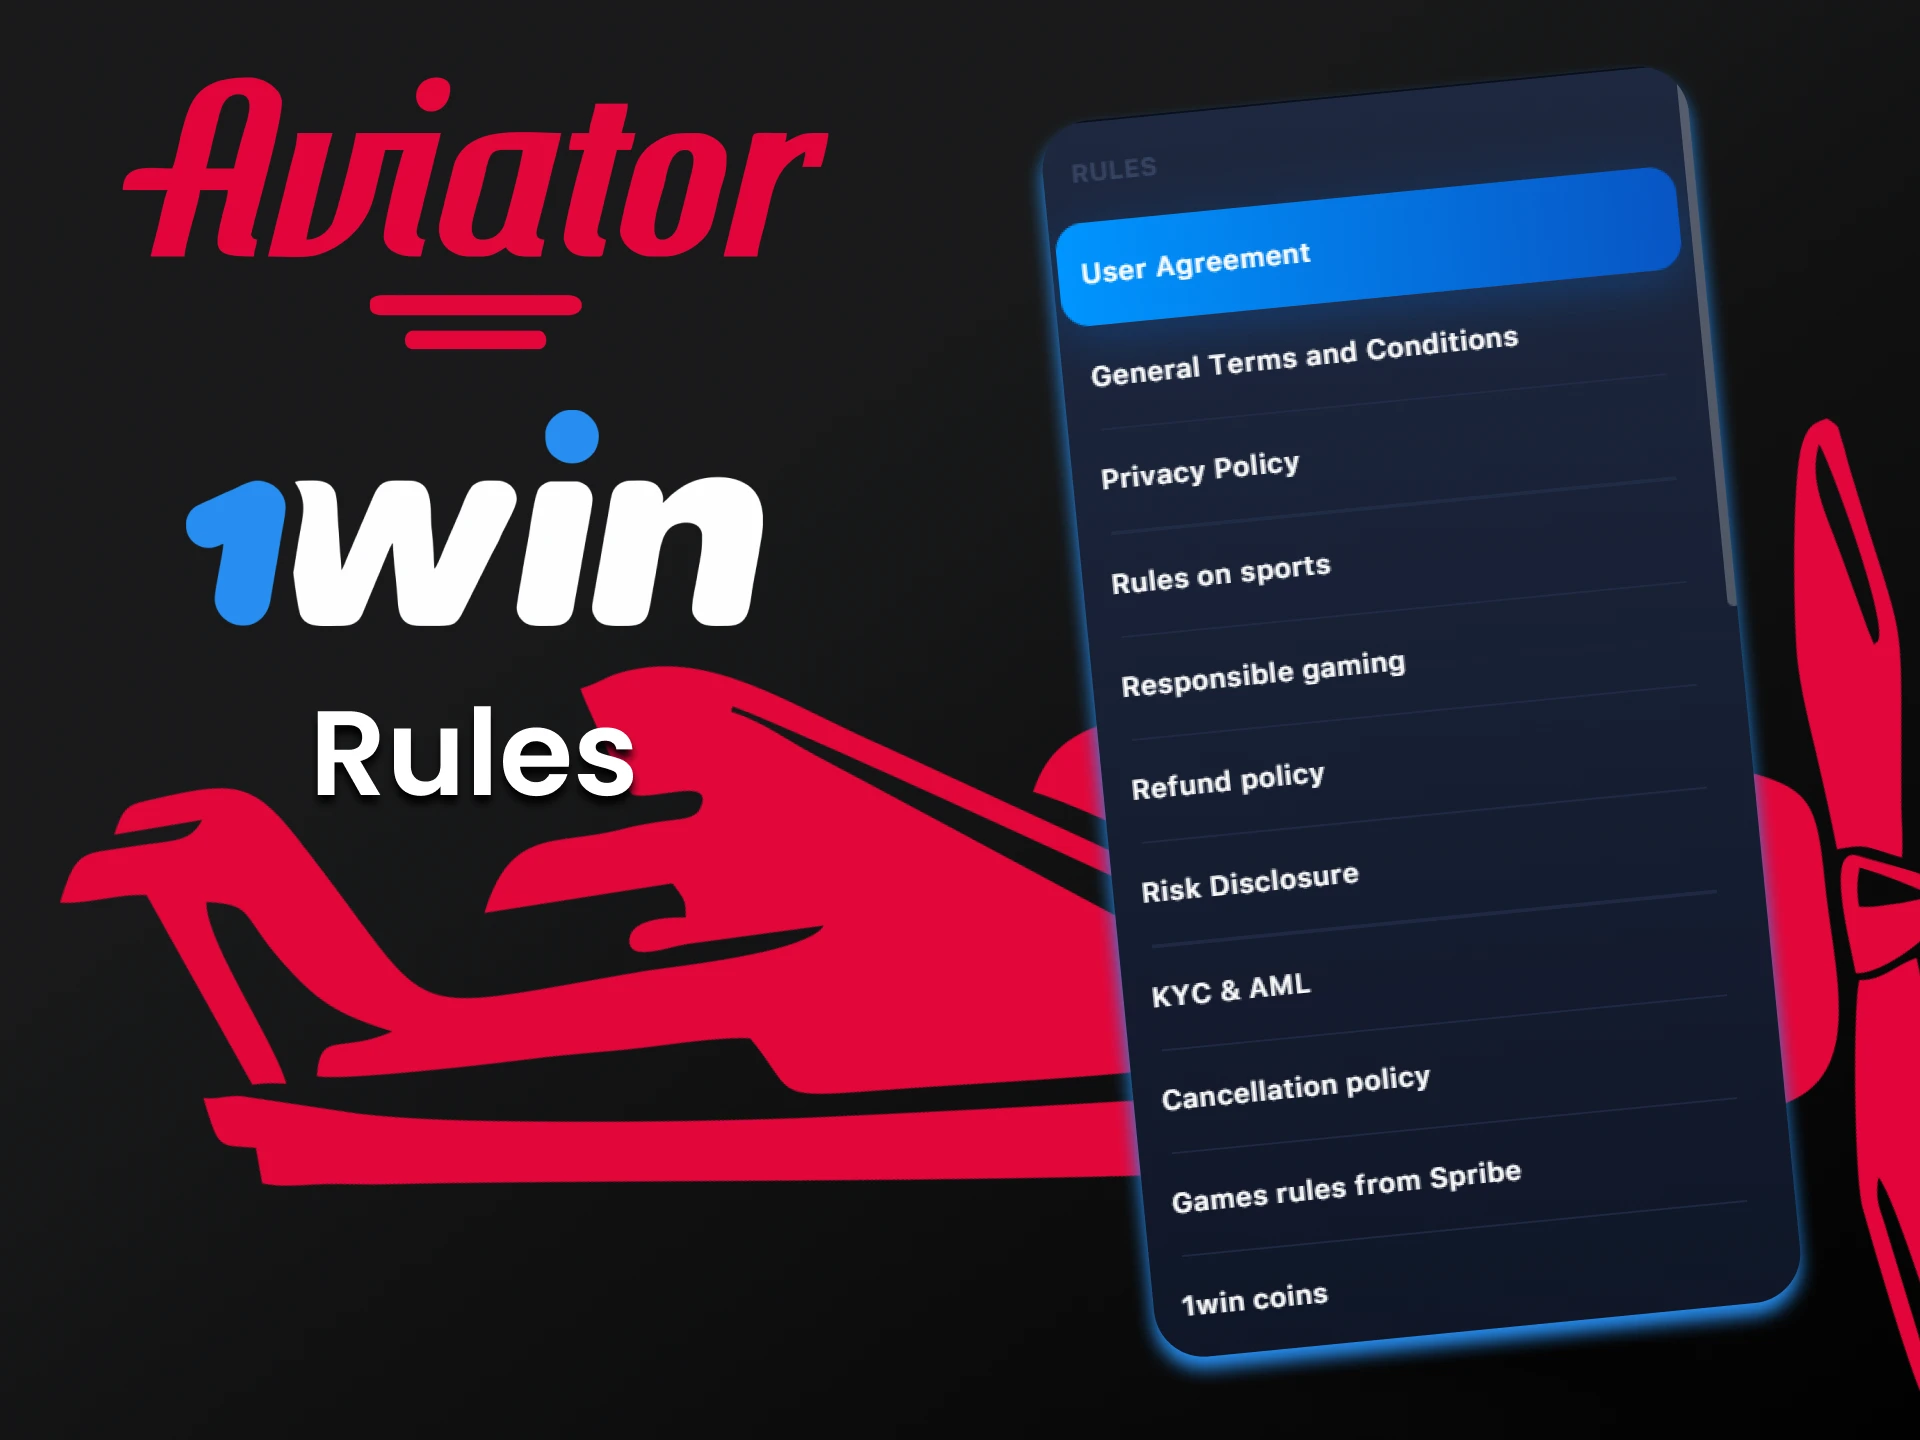 Learn the rules for using the 1win service.